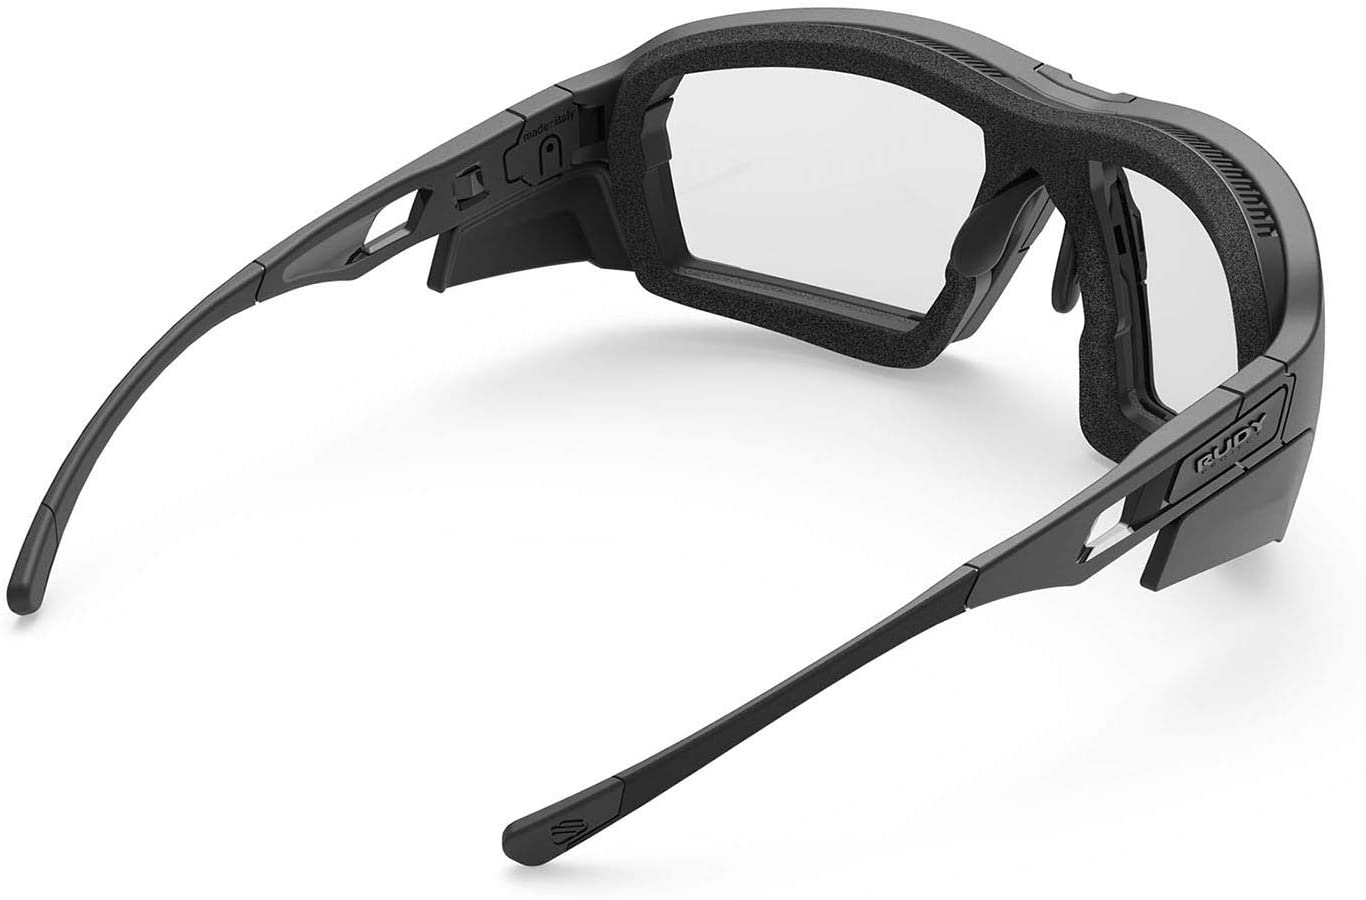 Rudy Project Agent Q Stealth ImpactX Photochromic in Black matte